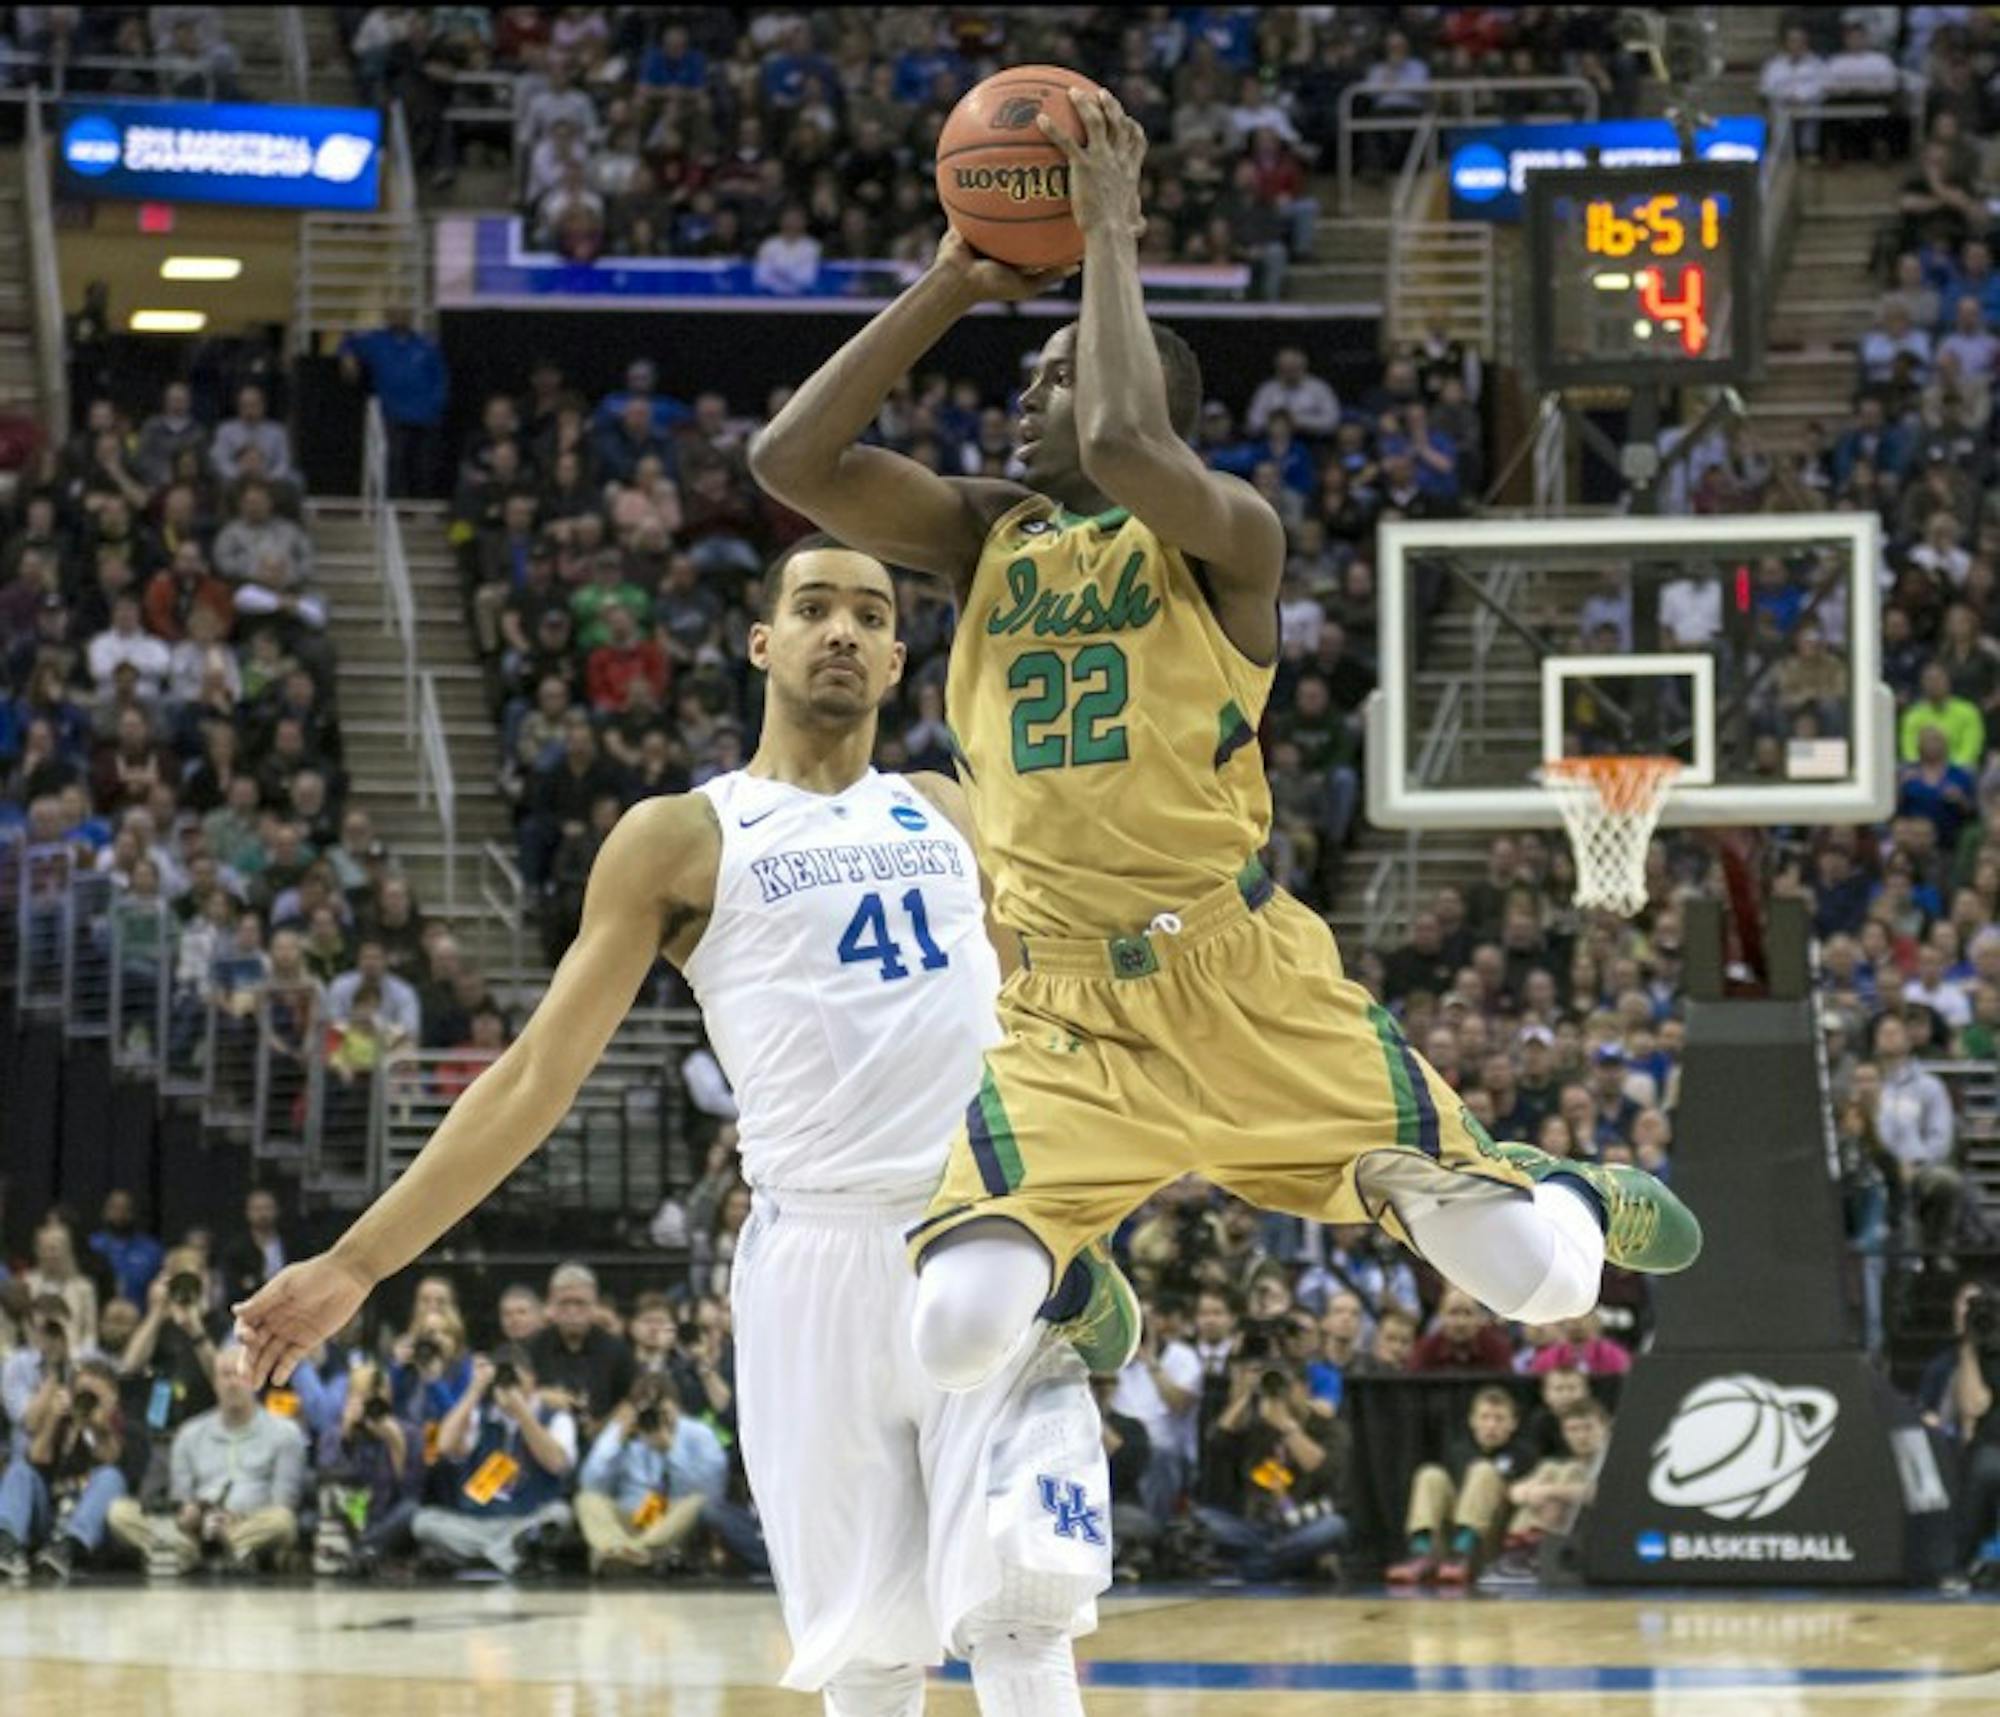 Irish senior guard Jerian Grant floats in the lane looking for a pass during Notre Dame’s 68-66 loss to   Kentucky during their Elite Eight matchup March 28.  Grant finished with 15 points and six assists.